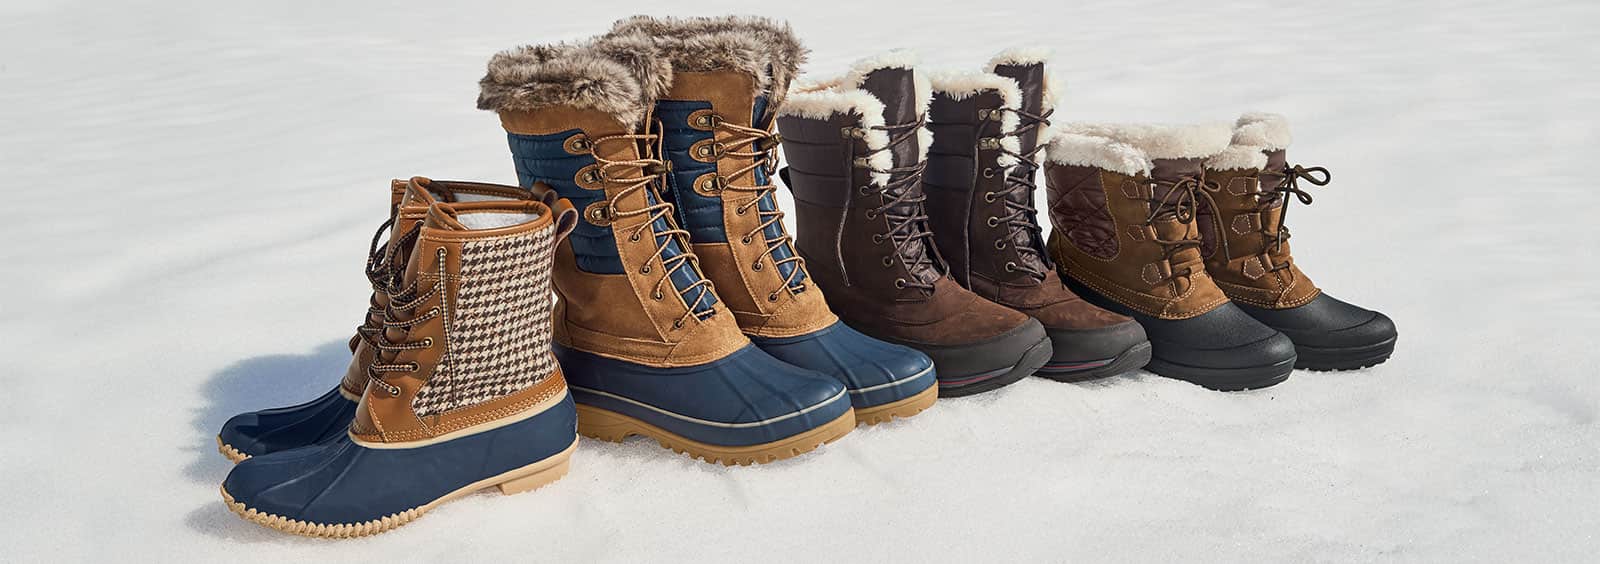 Slippery Sidewalks Are No Match For These Stylish Winter Boots